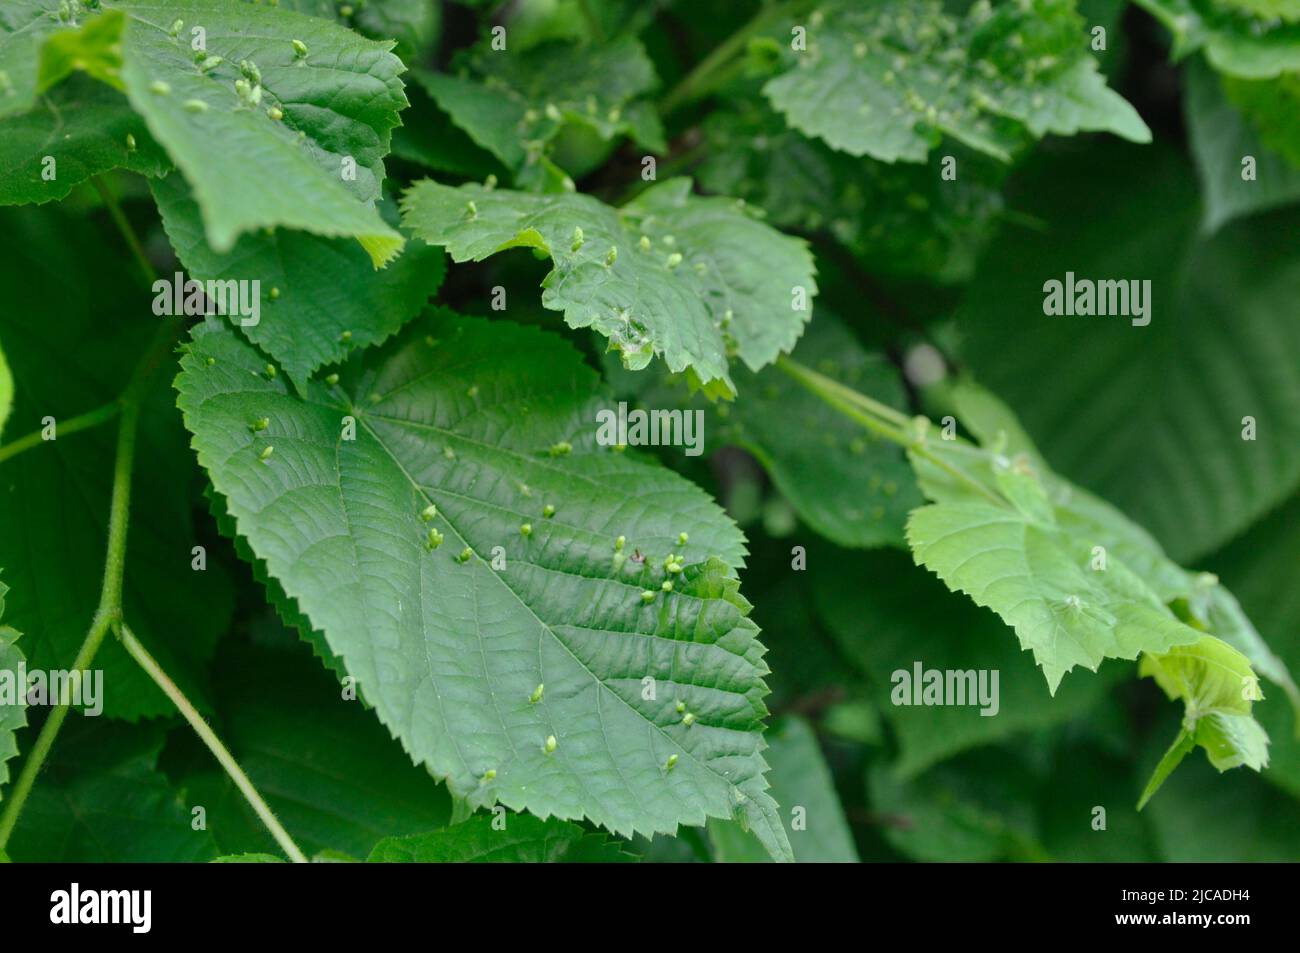 Lime gall caused by the gall mite (Eriophyes tiliae tiliae) on the leaves of the common linden. Tree leaf disease. Stock Photo